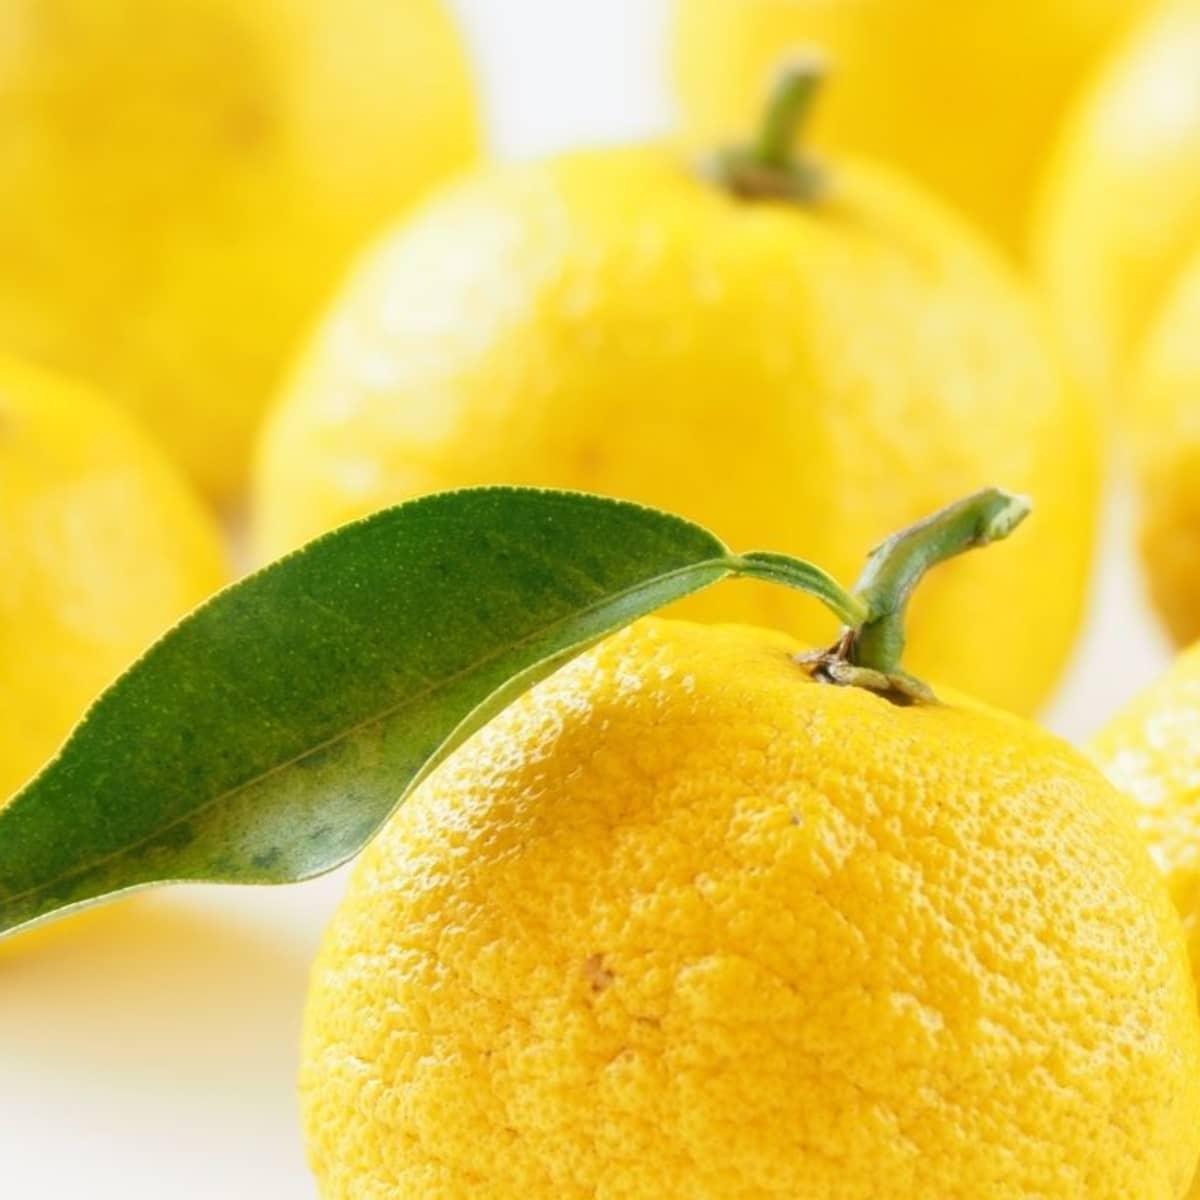 All About Yuzu. What Is It and What Does It Taste Like?